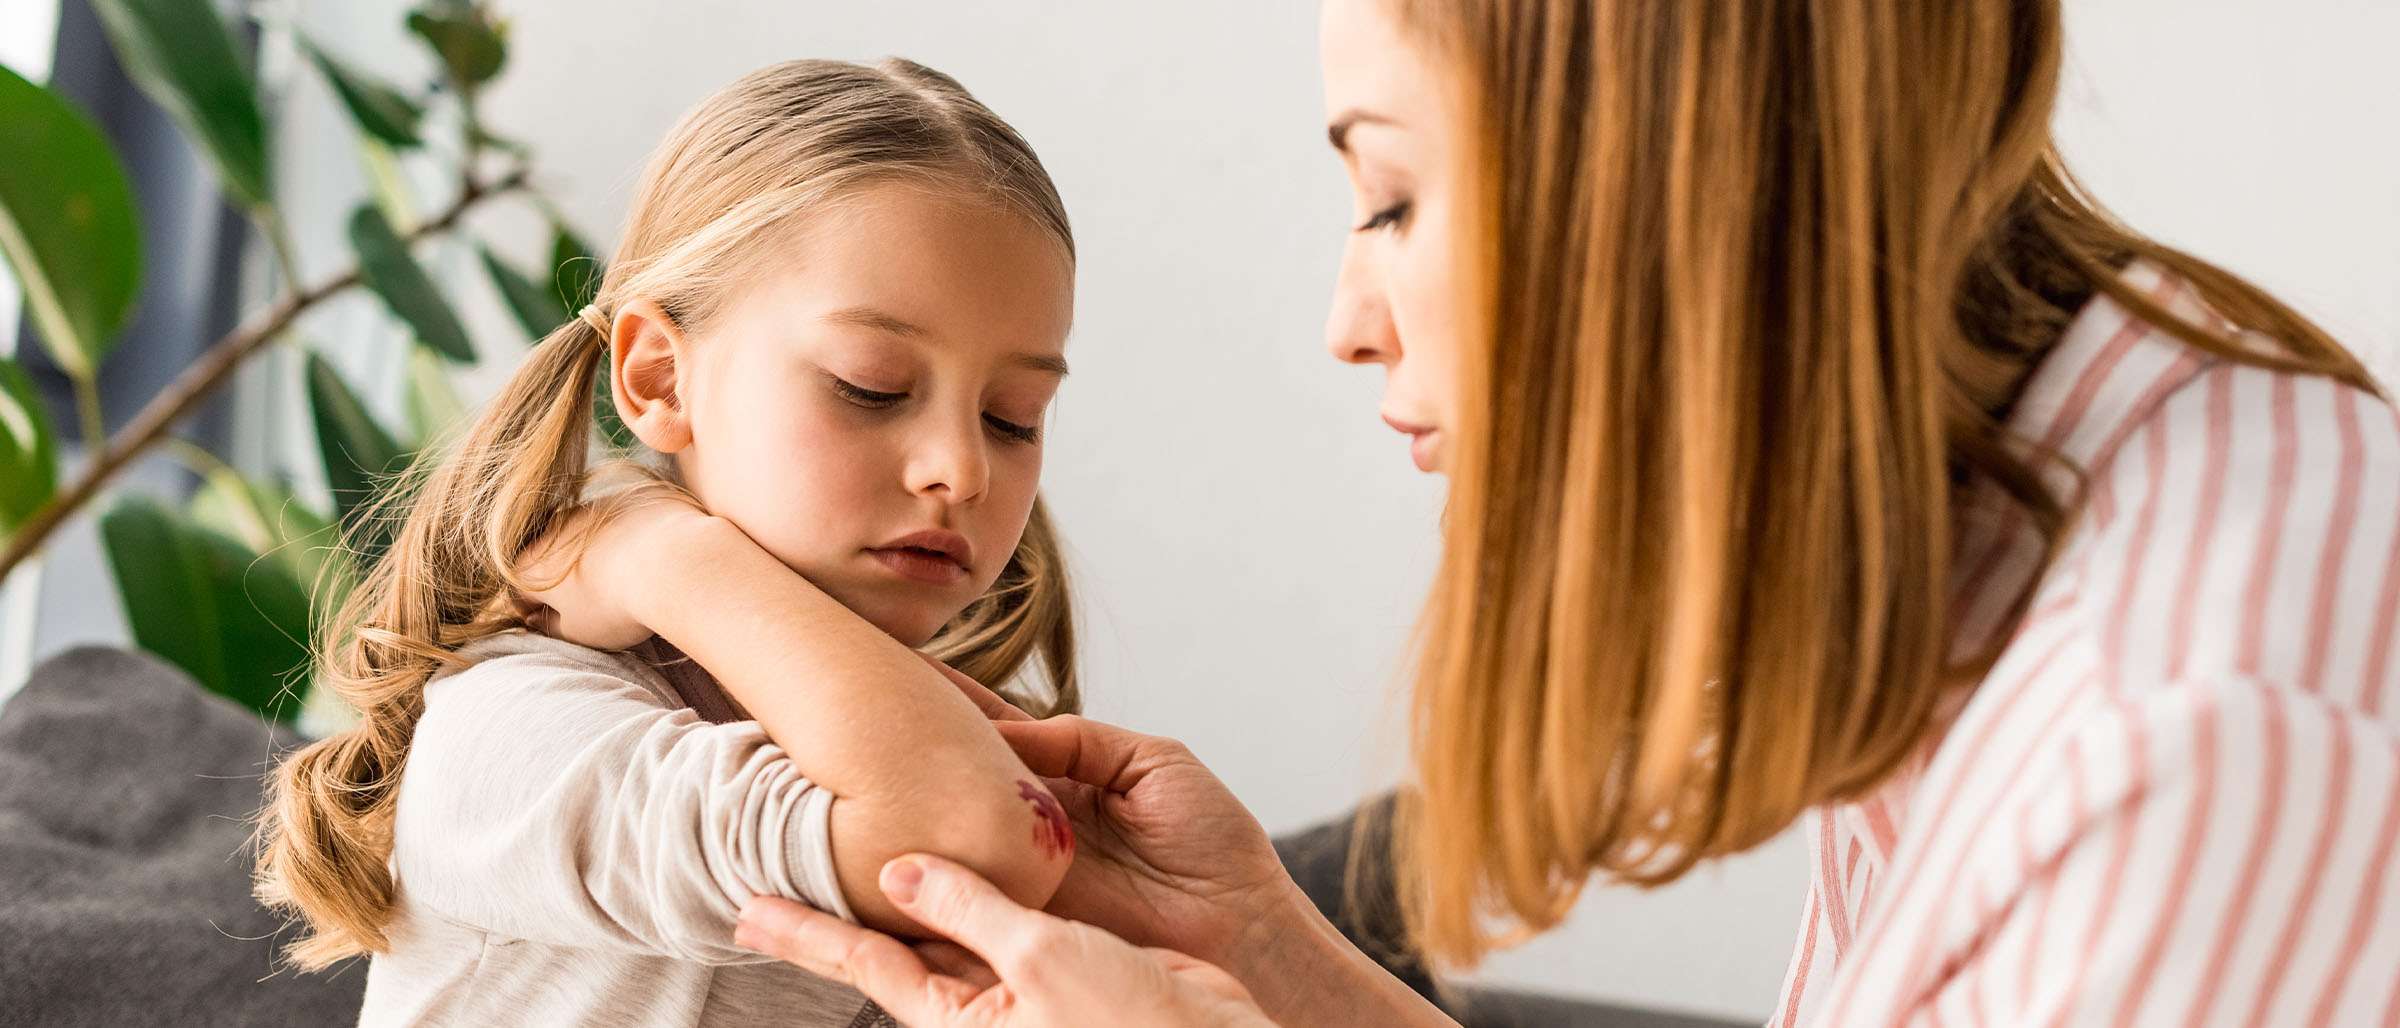 Wounds In Children Are Common During Summer... Here’s How to Treat them